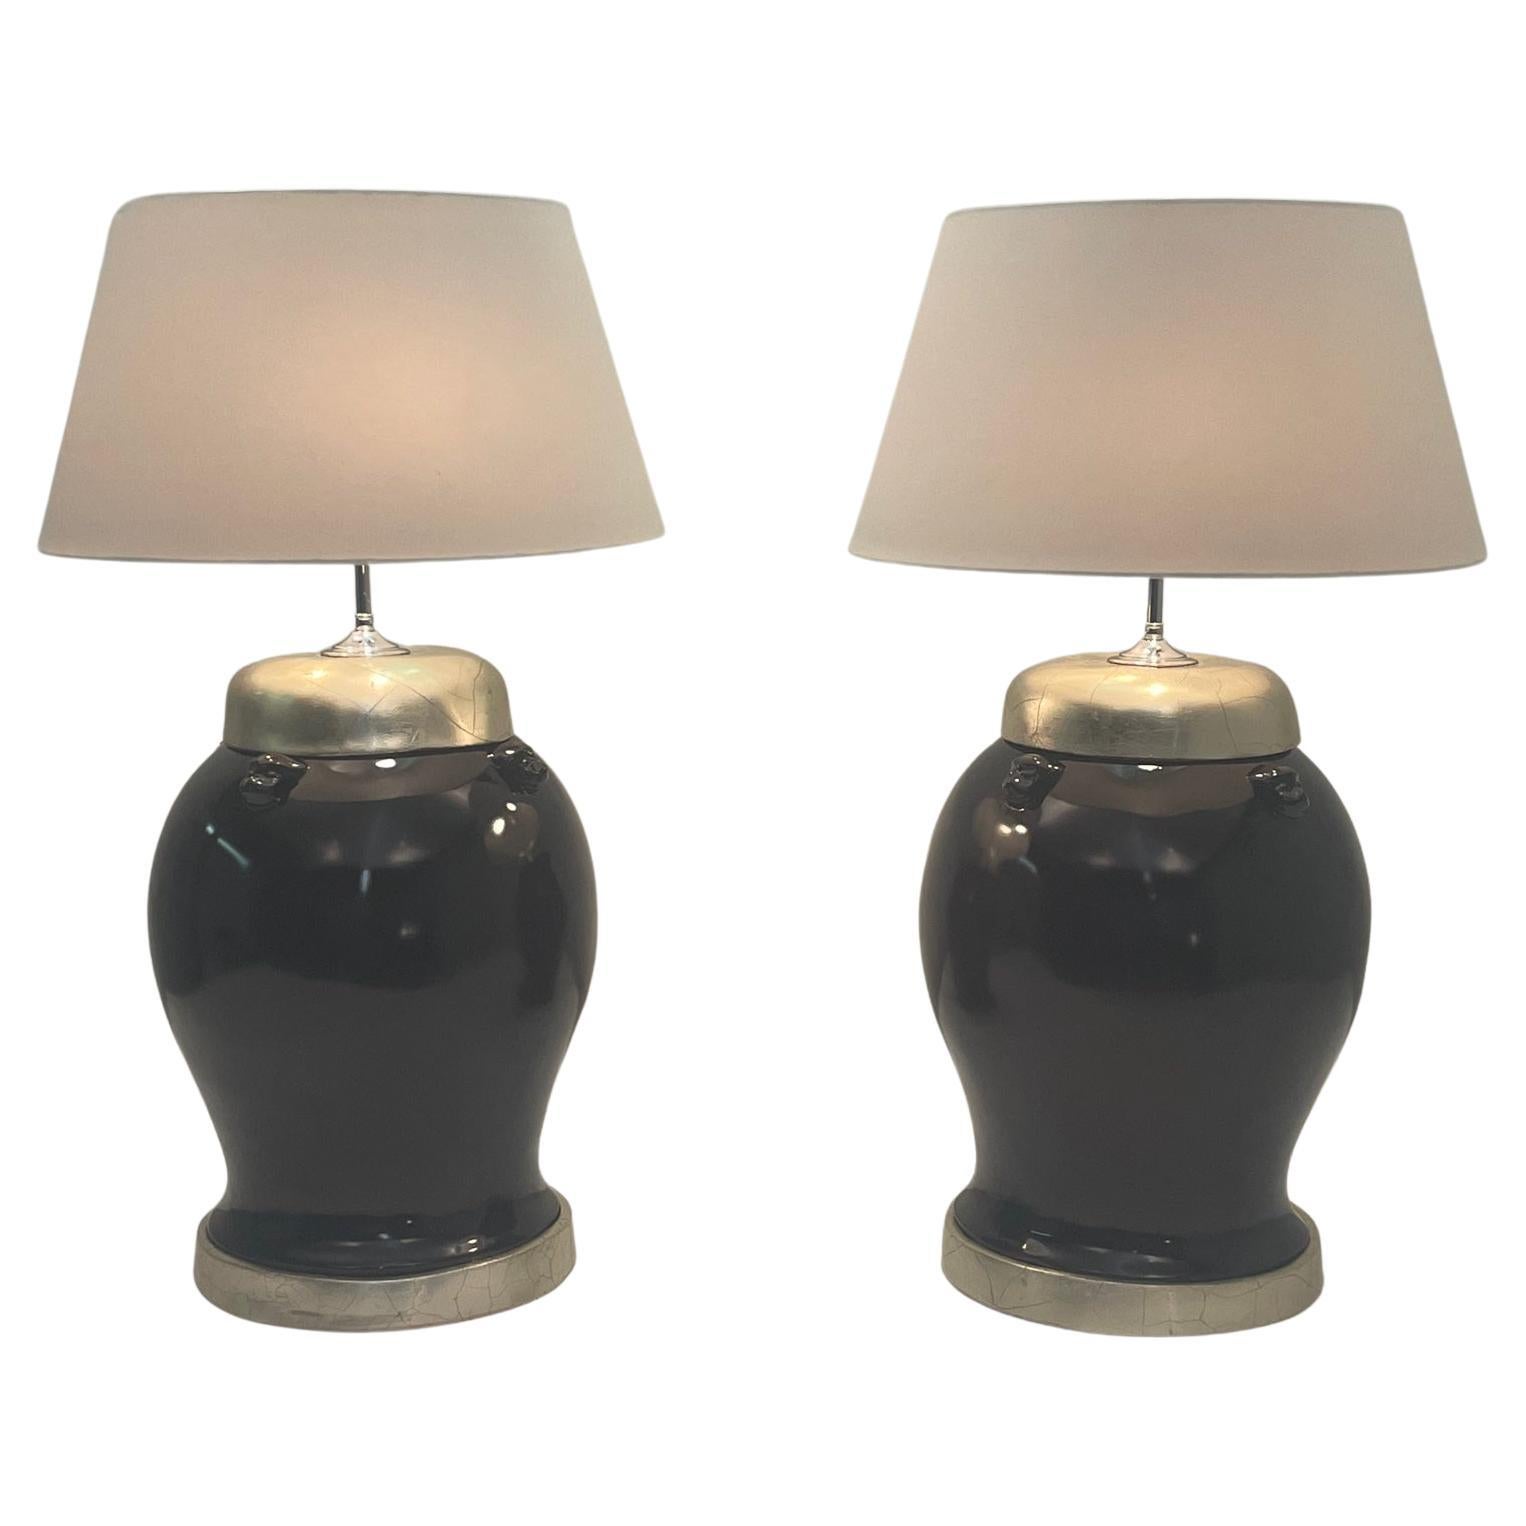 Impressive Pair of Rich Burgundy Laquer & Silver Leaf Ginger Jar Table Lamps For Sale